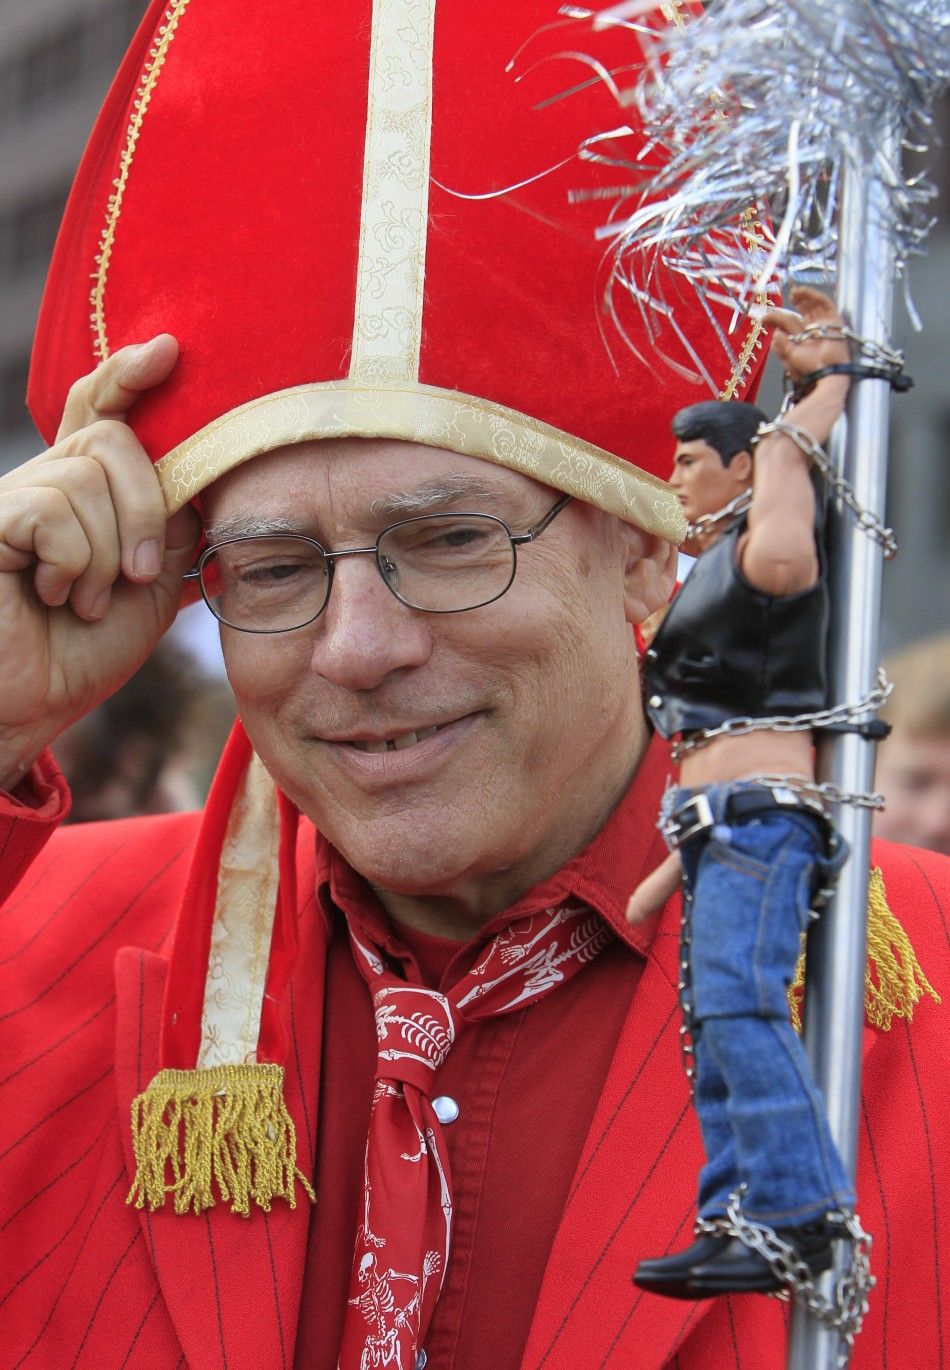 A demonstrator opposing the visit of Pope Benedict XVI dresses as a Cardinal and holds an action figure doll during a protest at Potsdamer Platz in Berlin